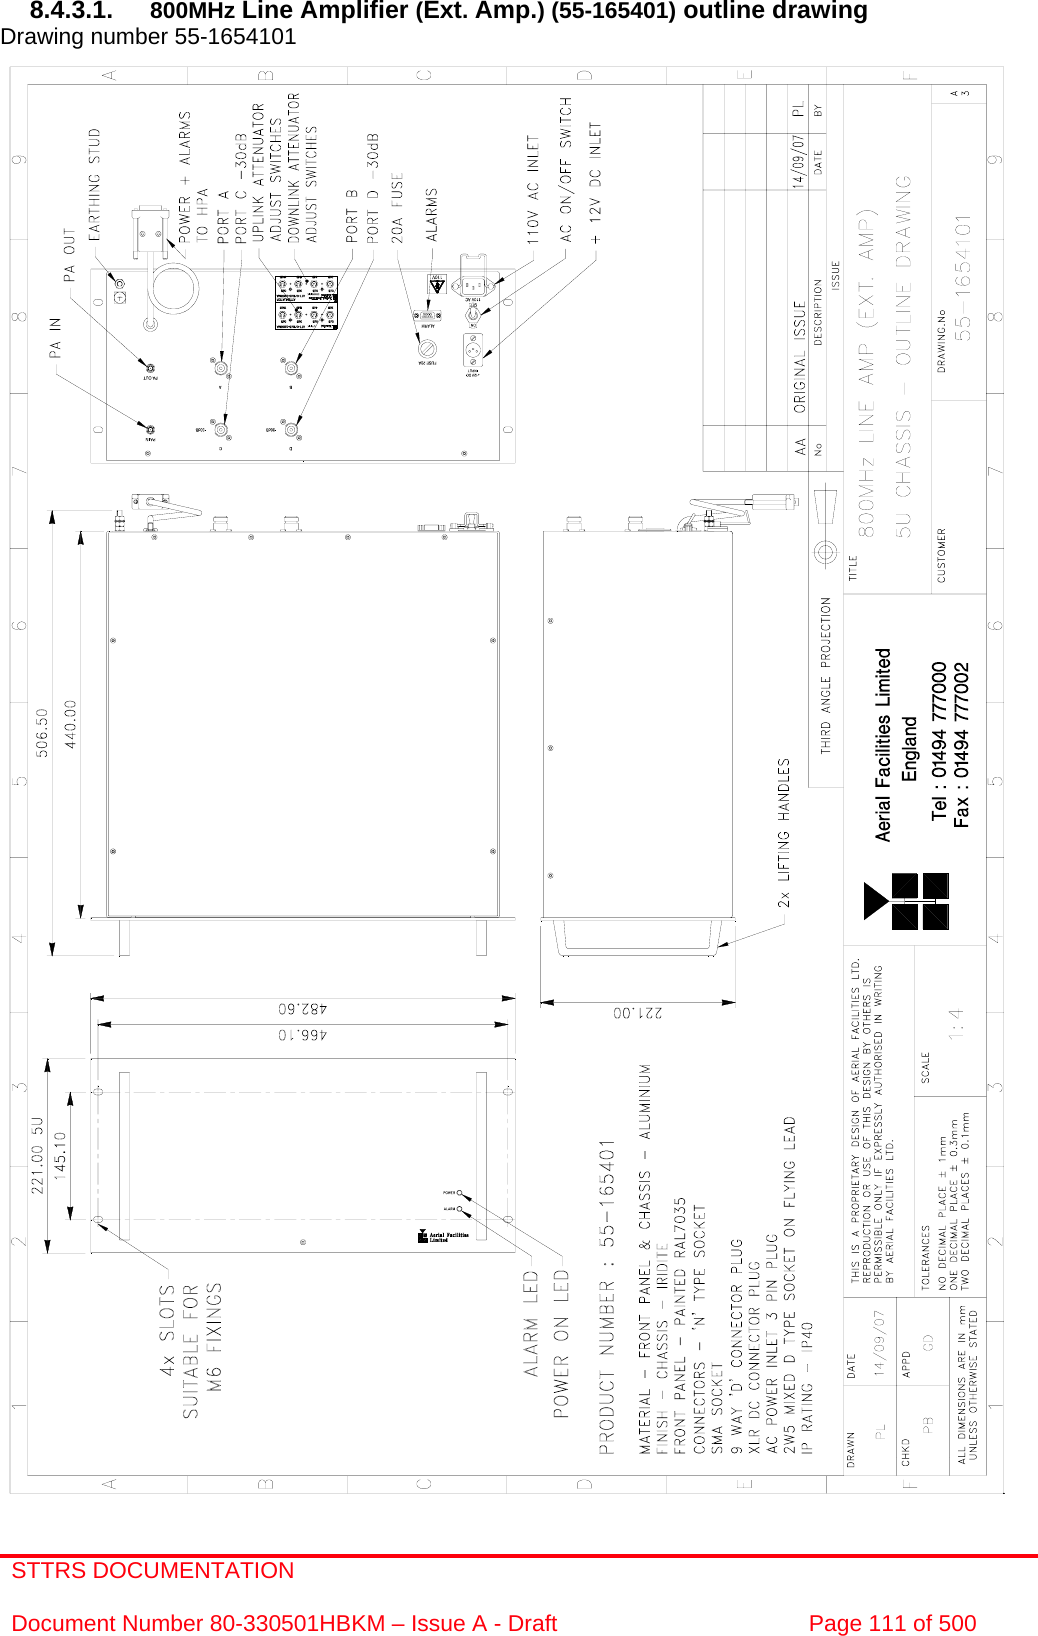 STTRS DOCUMENTATION  Document Number 80-330501HBKM – Issue A - Draft  Page 111 of 500   8.4.3.1.  800MHz Line Amplifier (Ext. Amp.) (55-165401) outline drawing Drawing number 55-1654101                                                        